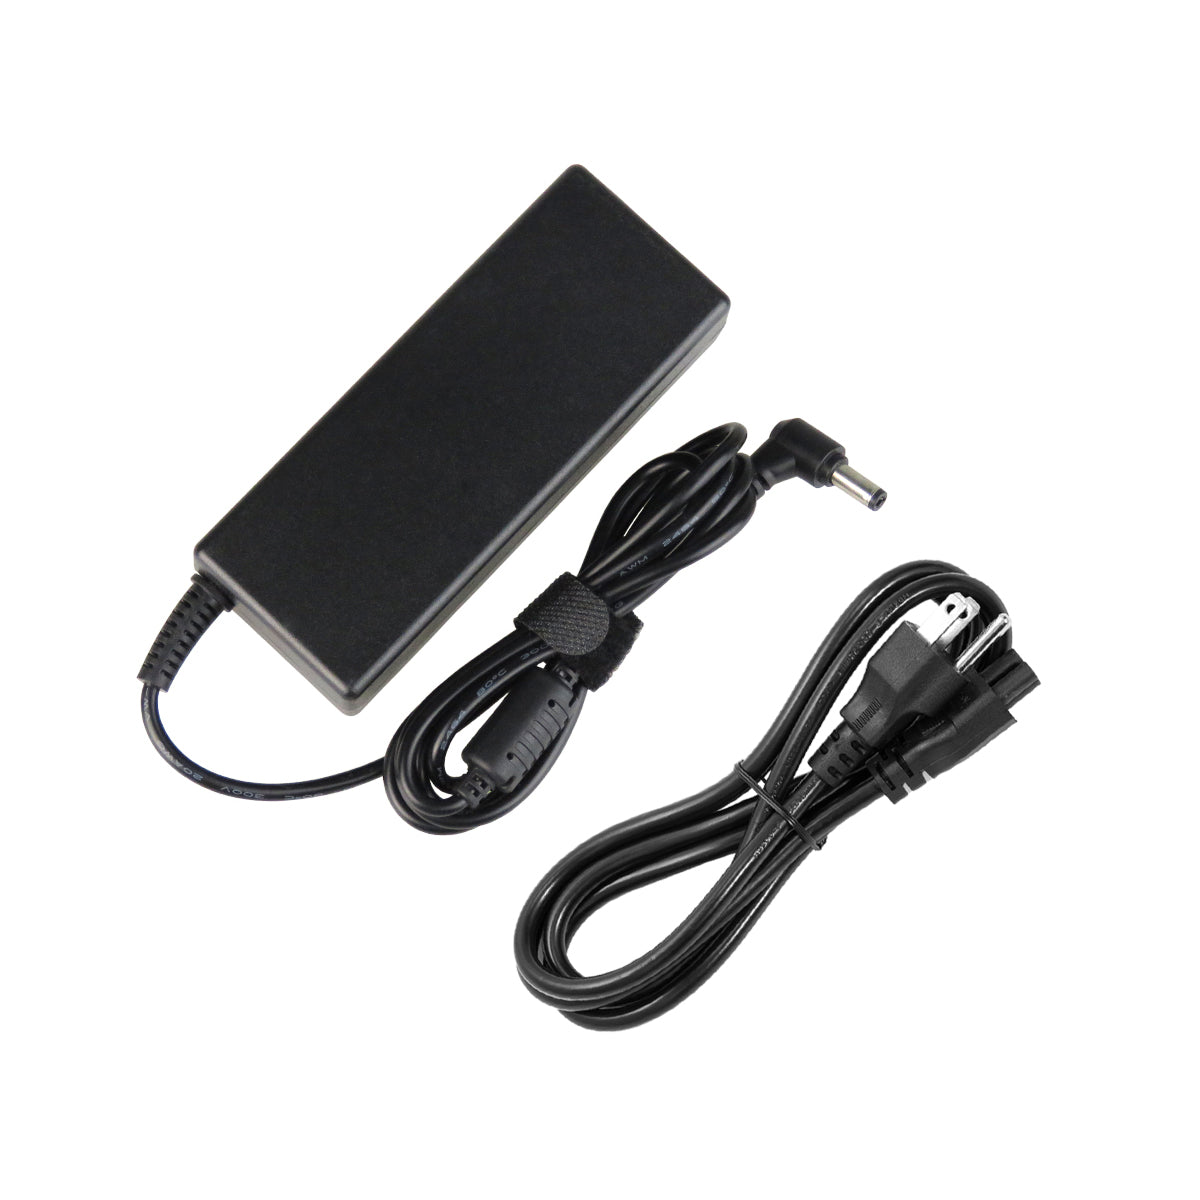 AC Adapter Charger for Gateway S-7125 Notebook.